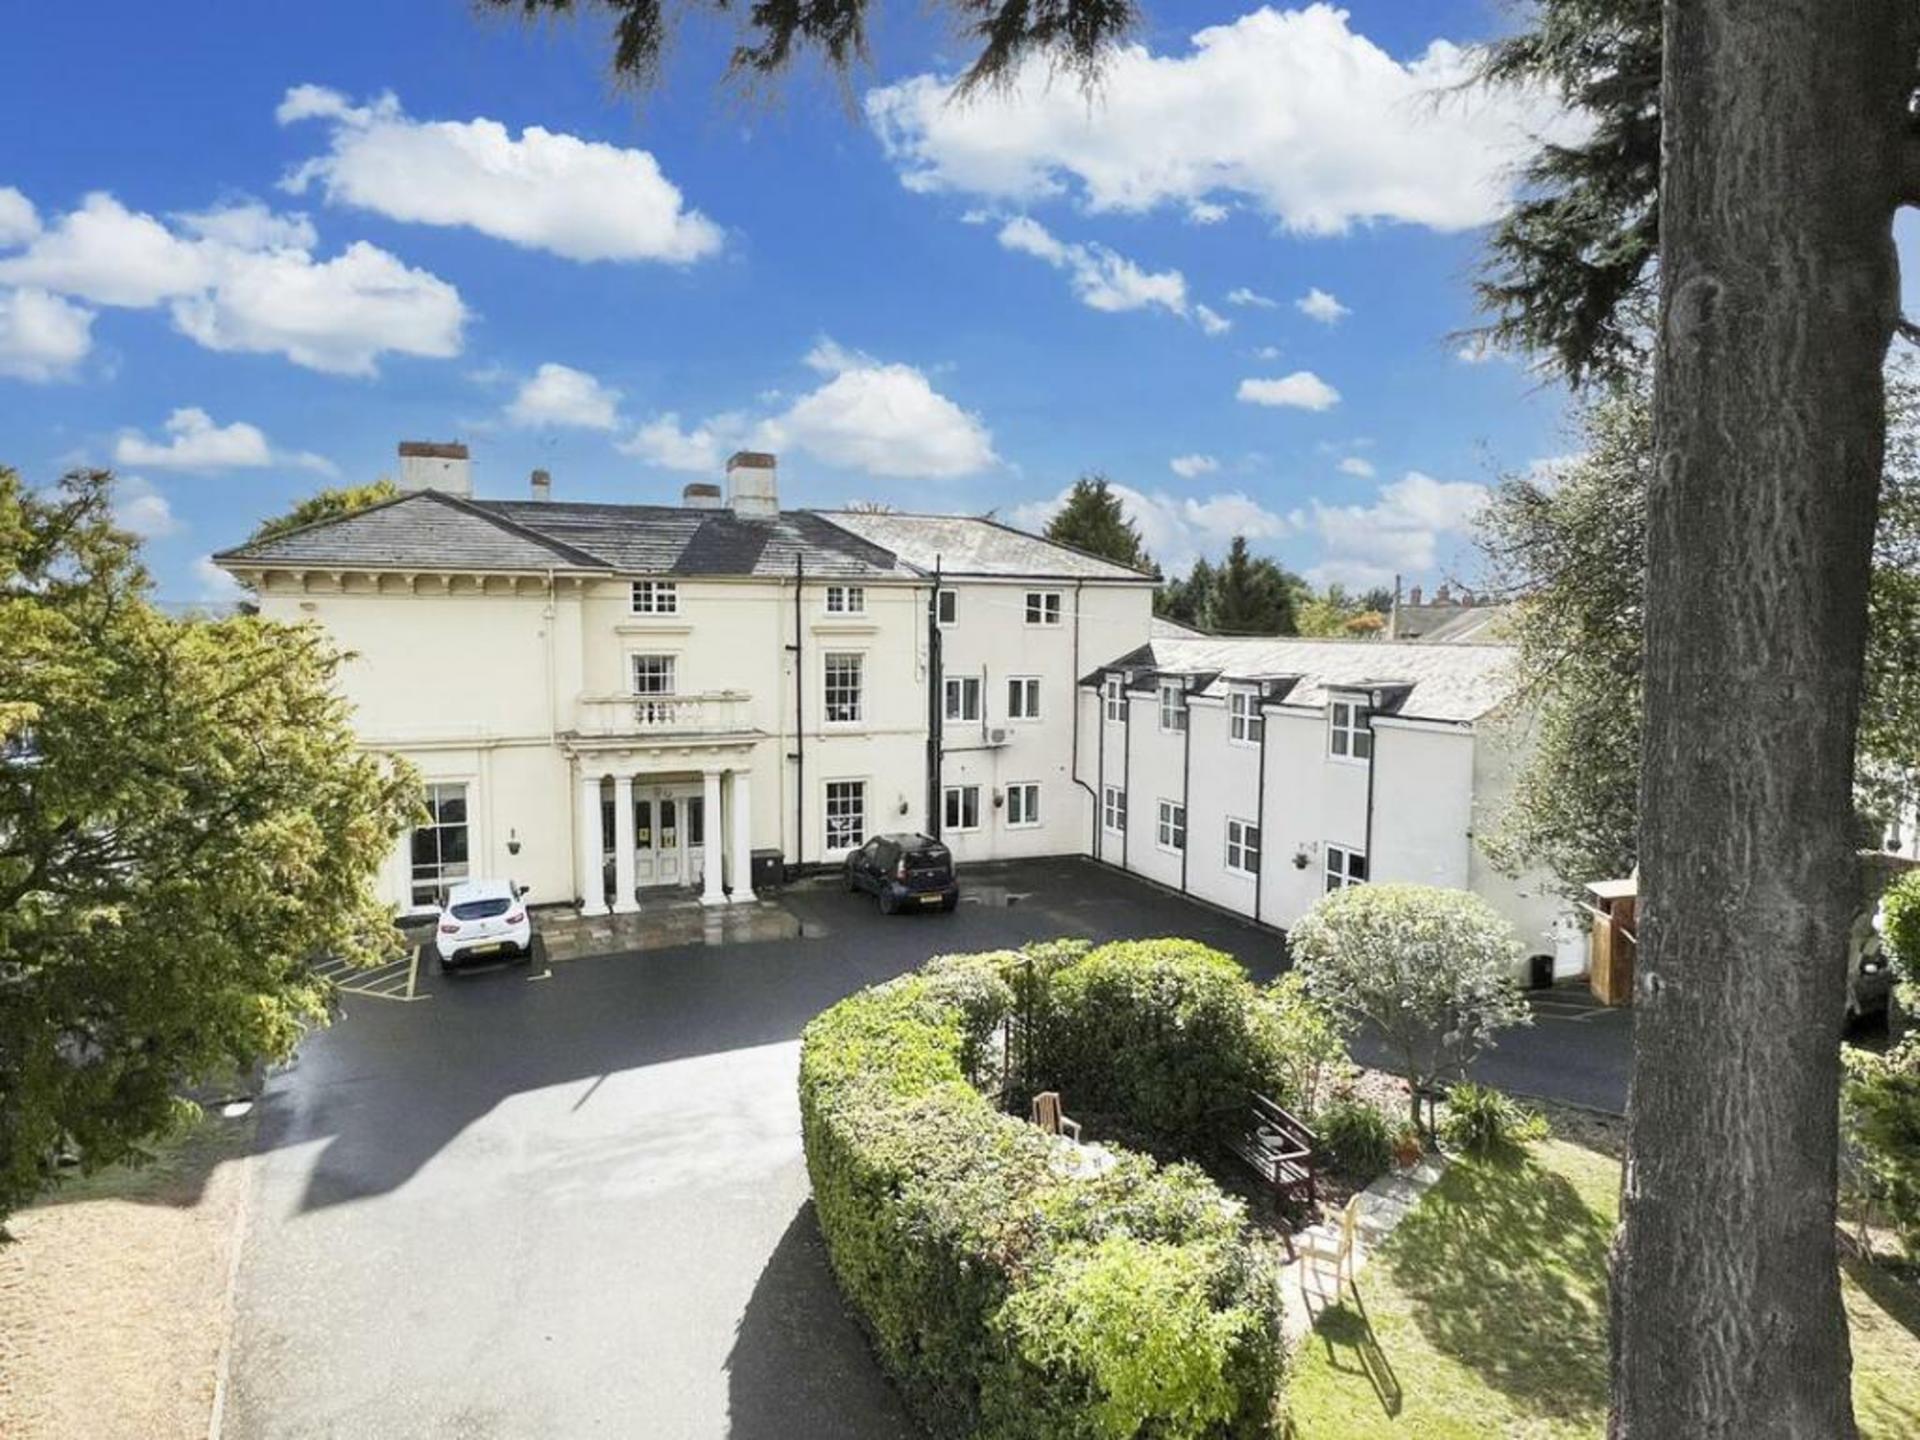 Shropshire care home for sale for £1.95m